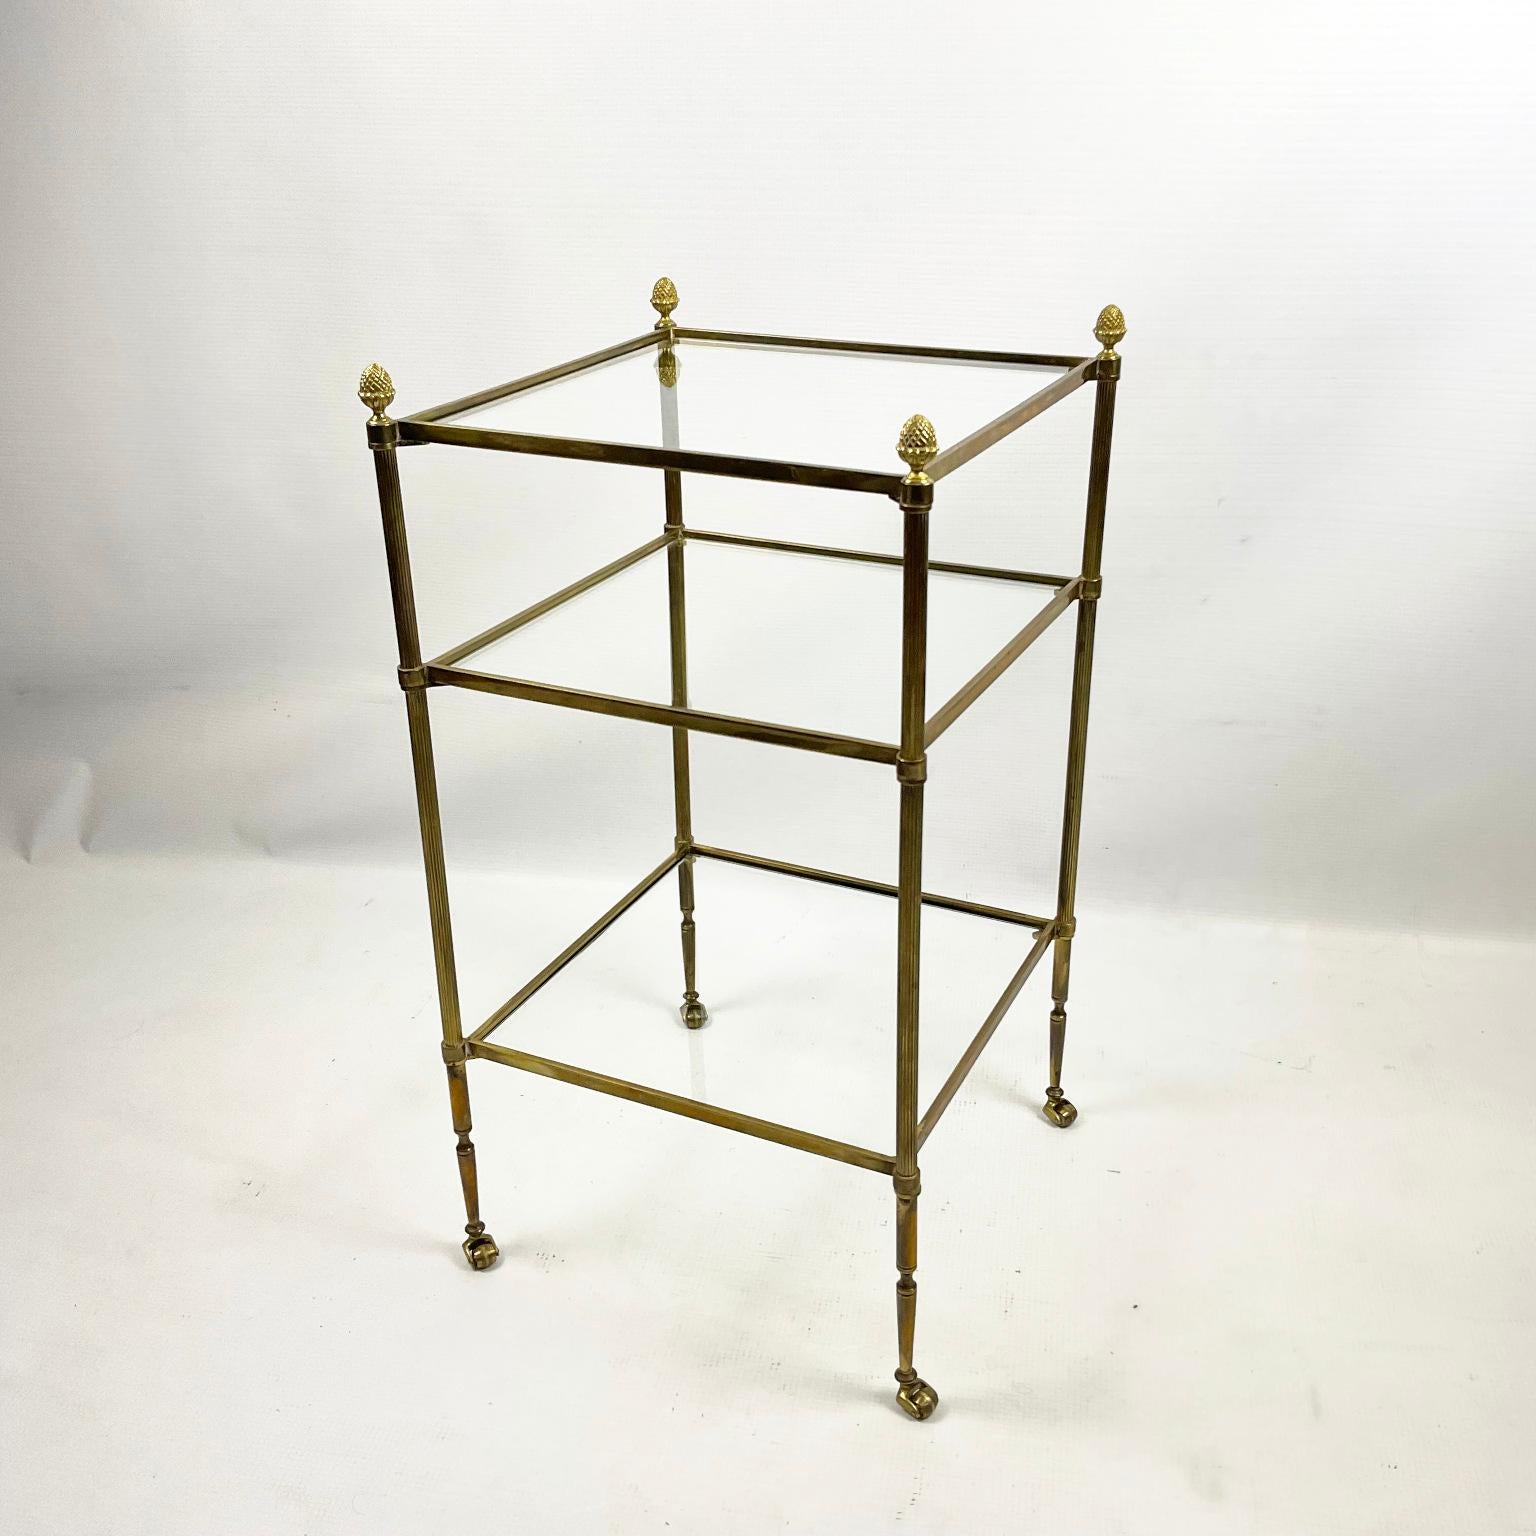 Small brass shelf or side table on wheels from the 1960s attributed to Maison Jansen
The mount is made of good-quality brass and topped with four decorative pine cones.
The three original glasses are made of low iron glass, which shows the quality